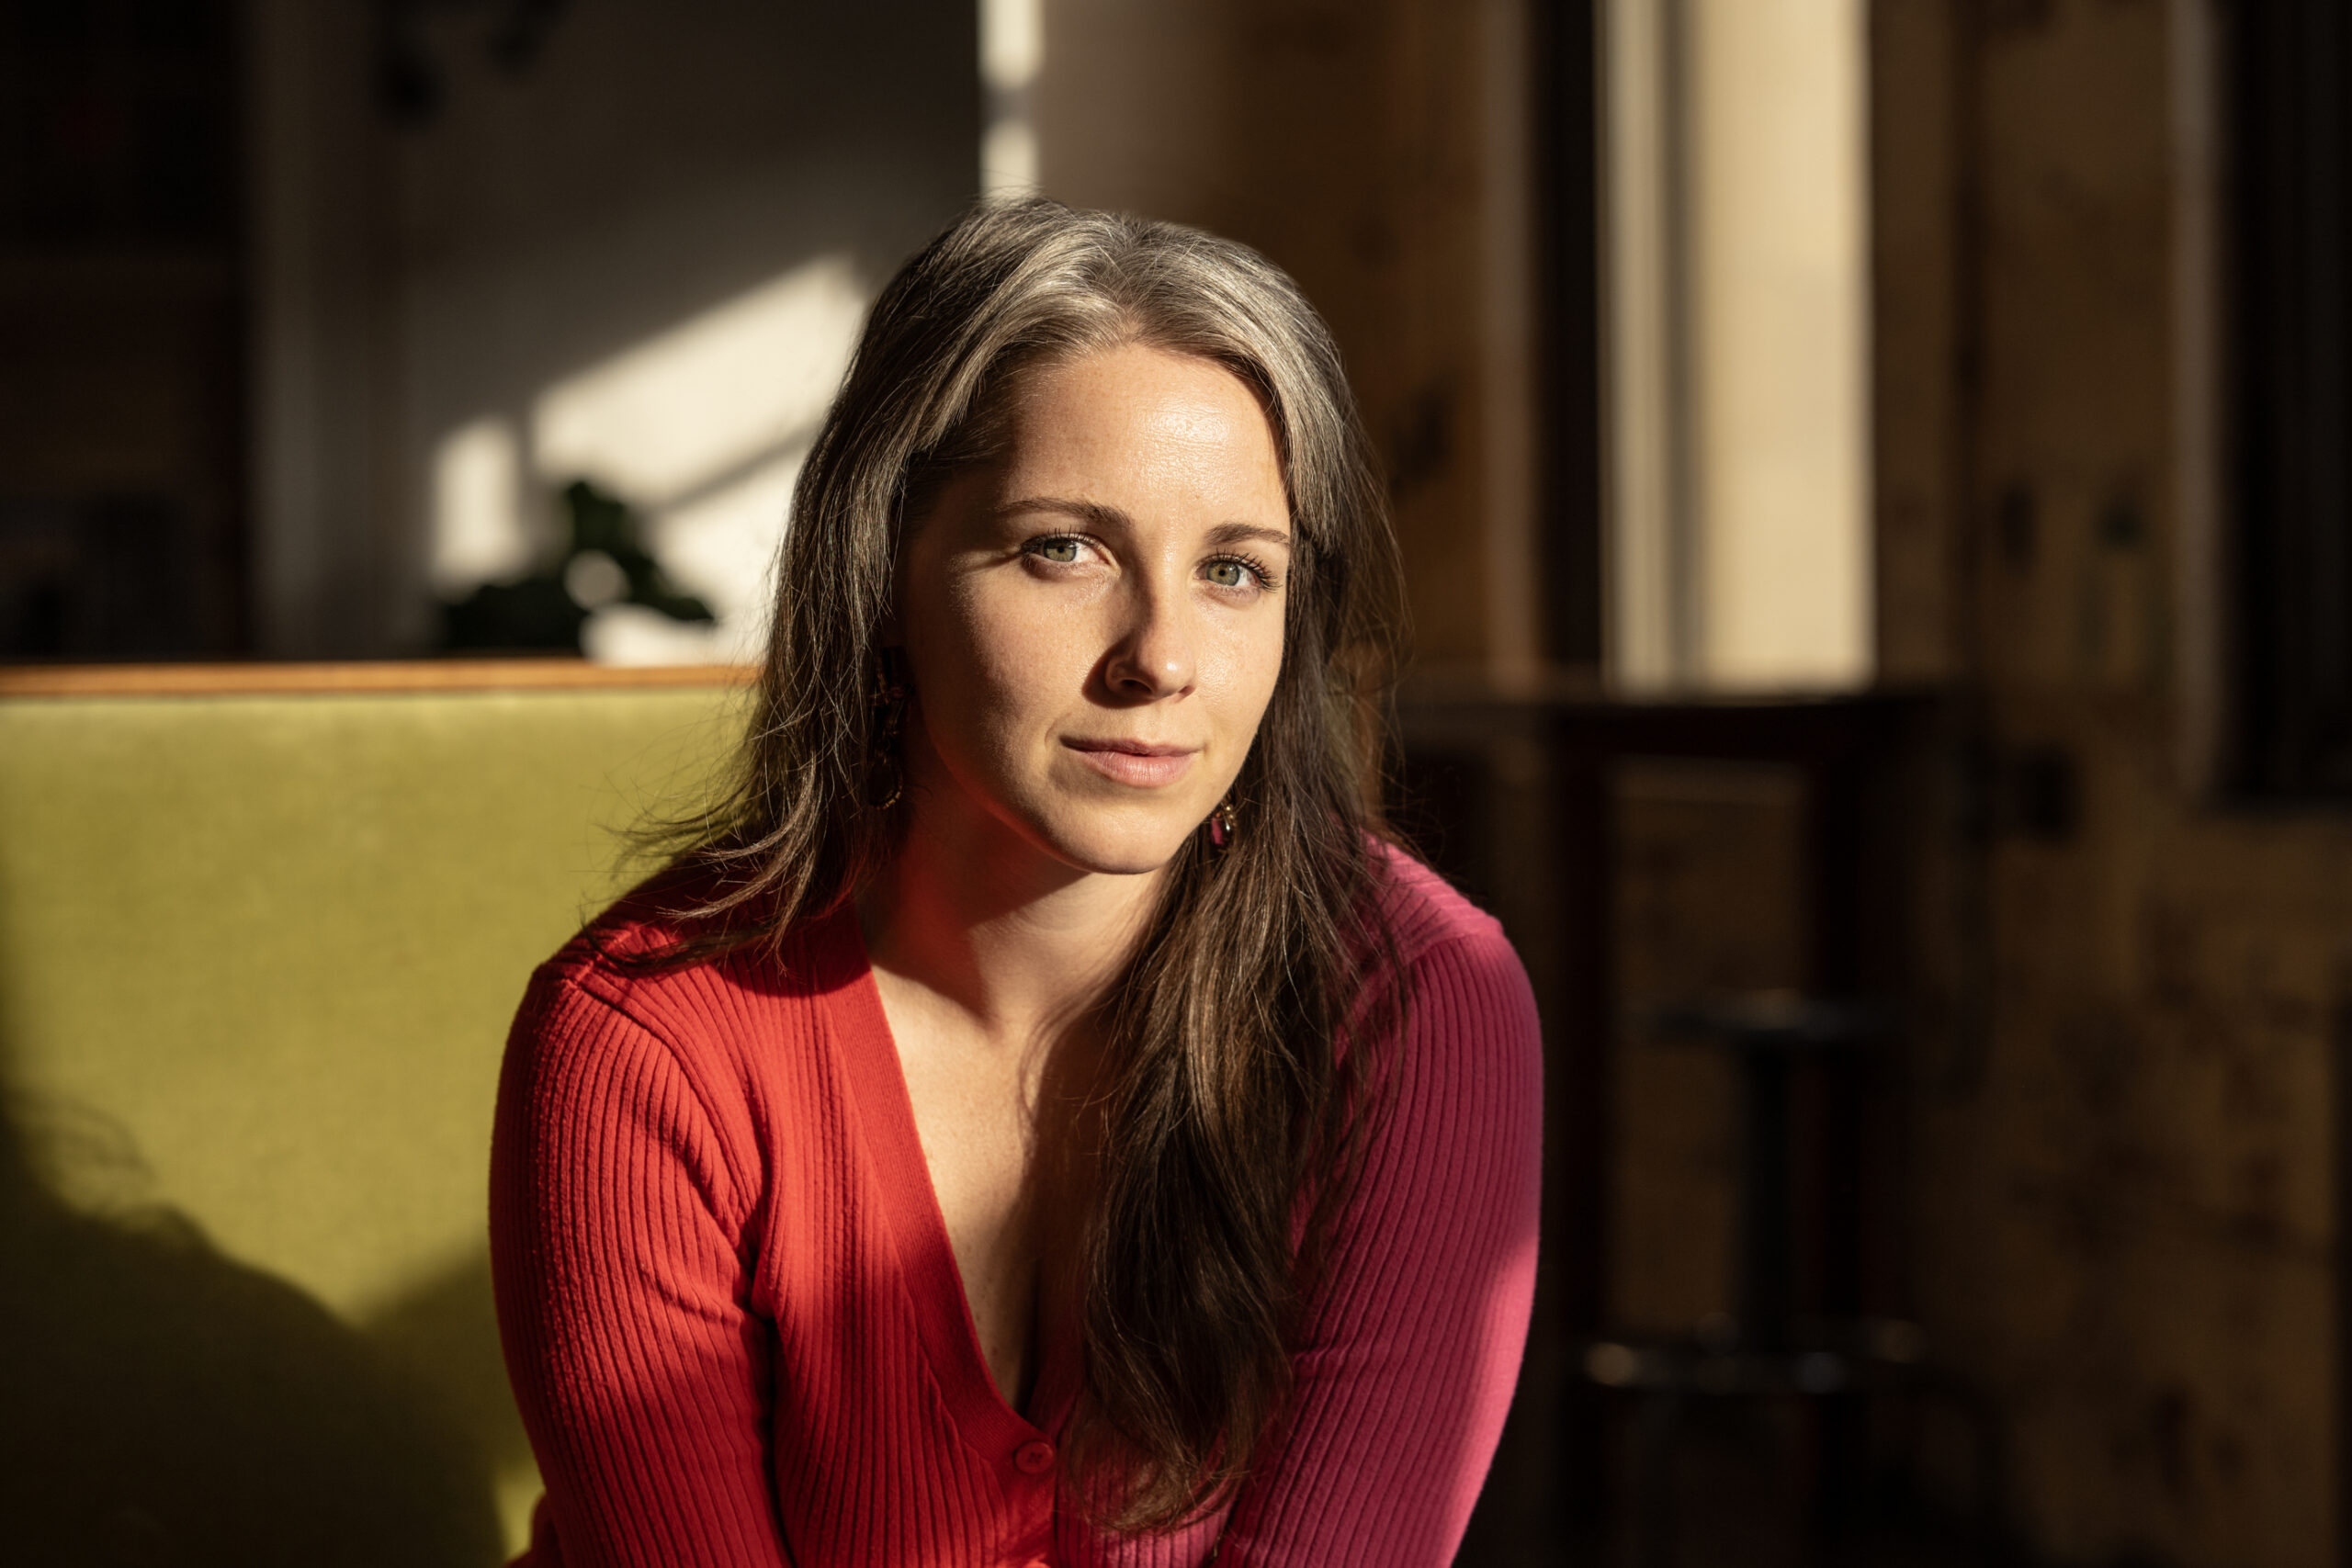 Portrait of Sarah Rachel Brown. Sarah has long brown hair, is wearing a red sweater, and is lit with natural light from a nearby window.